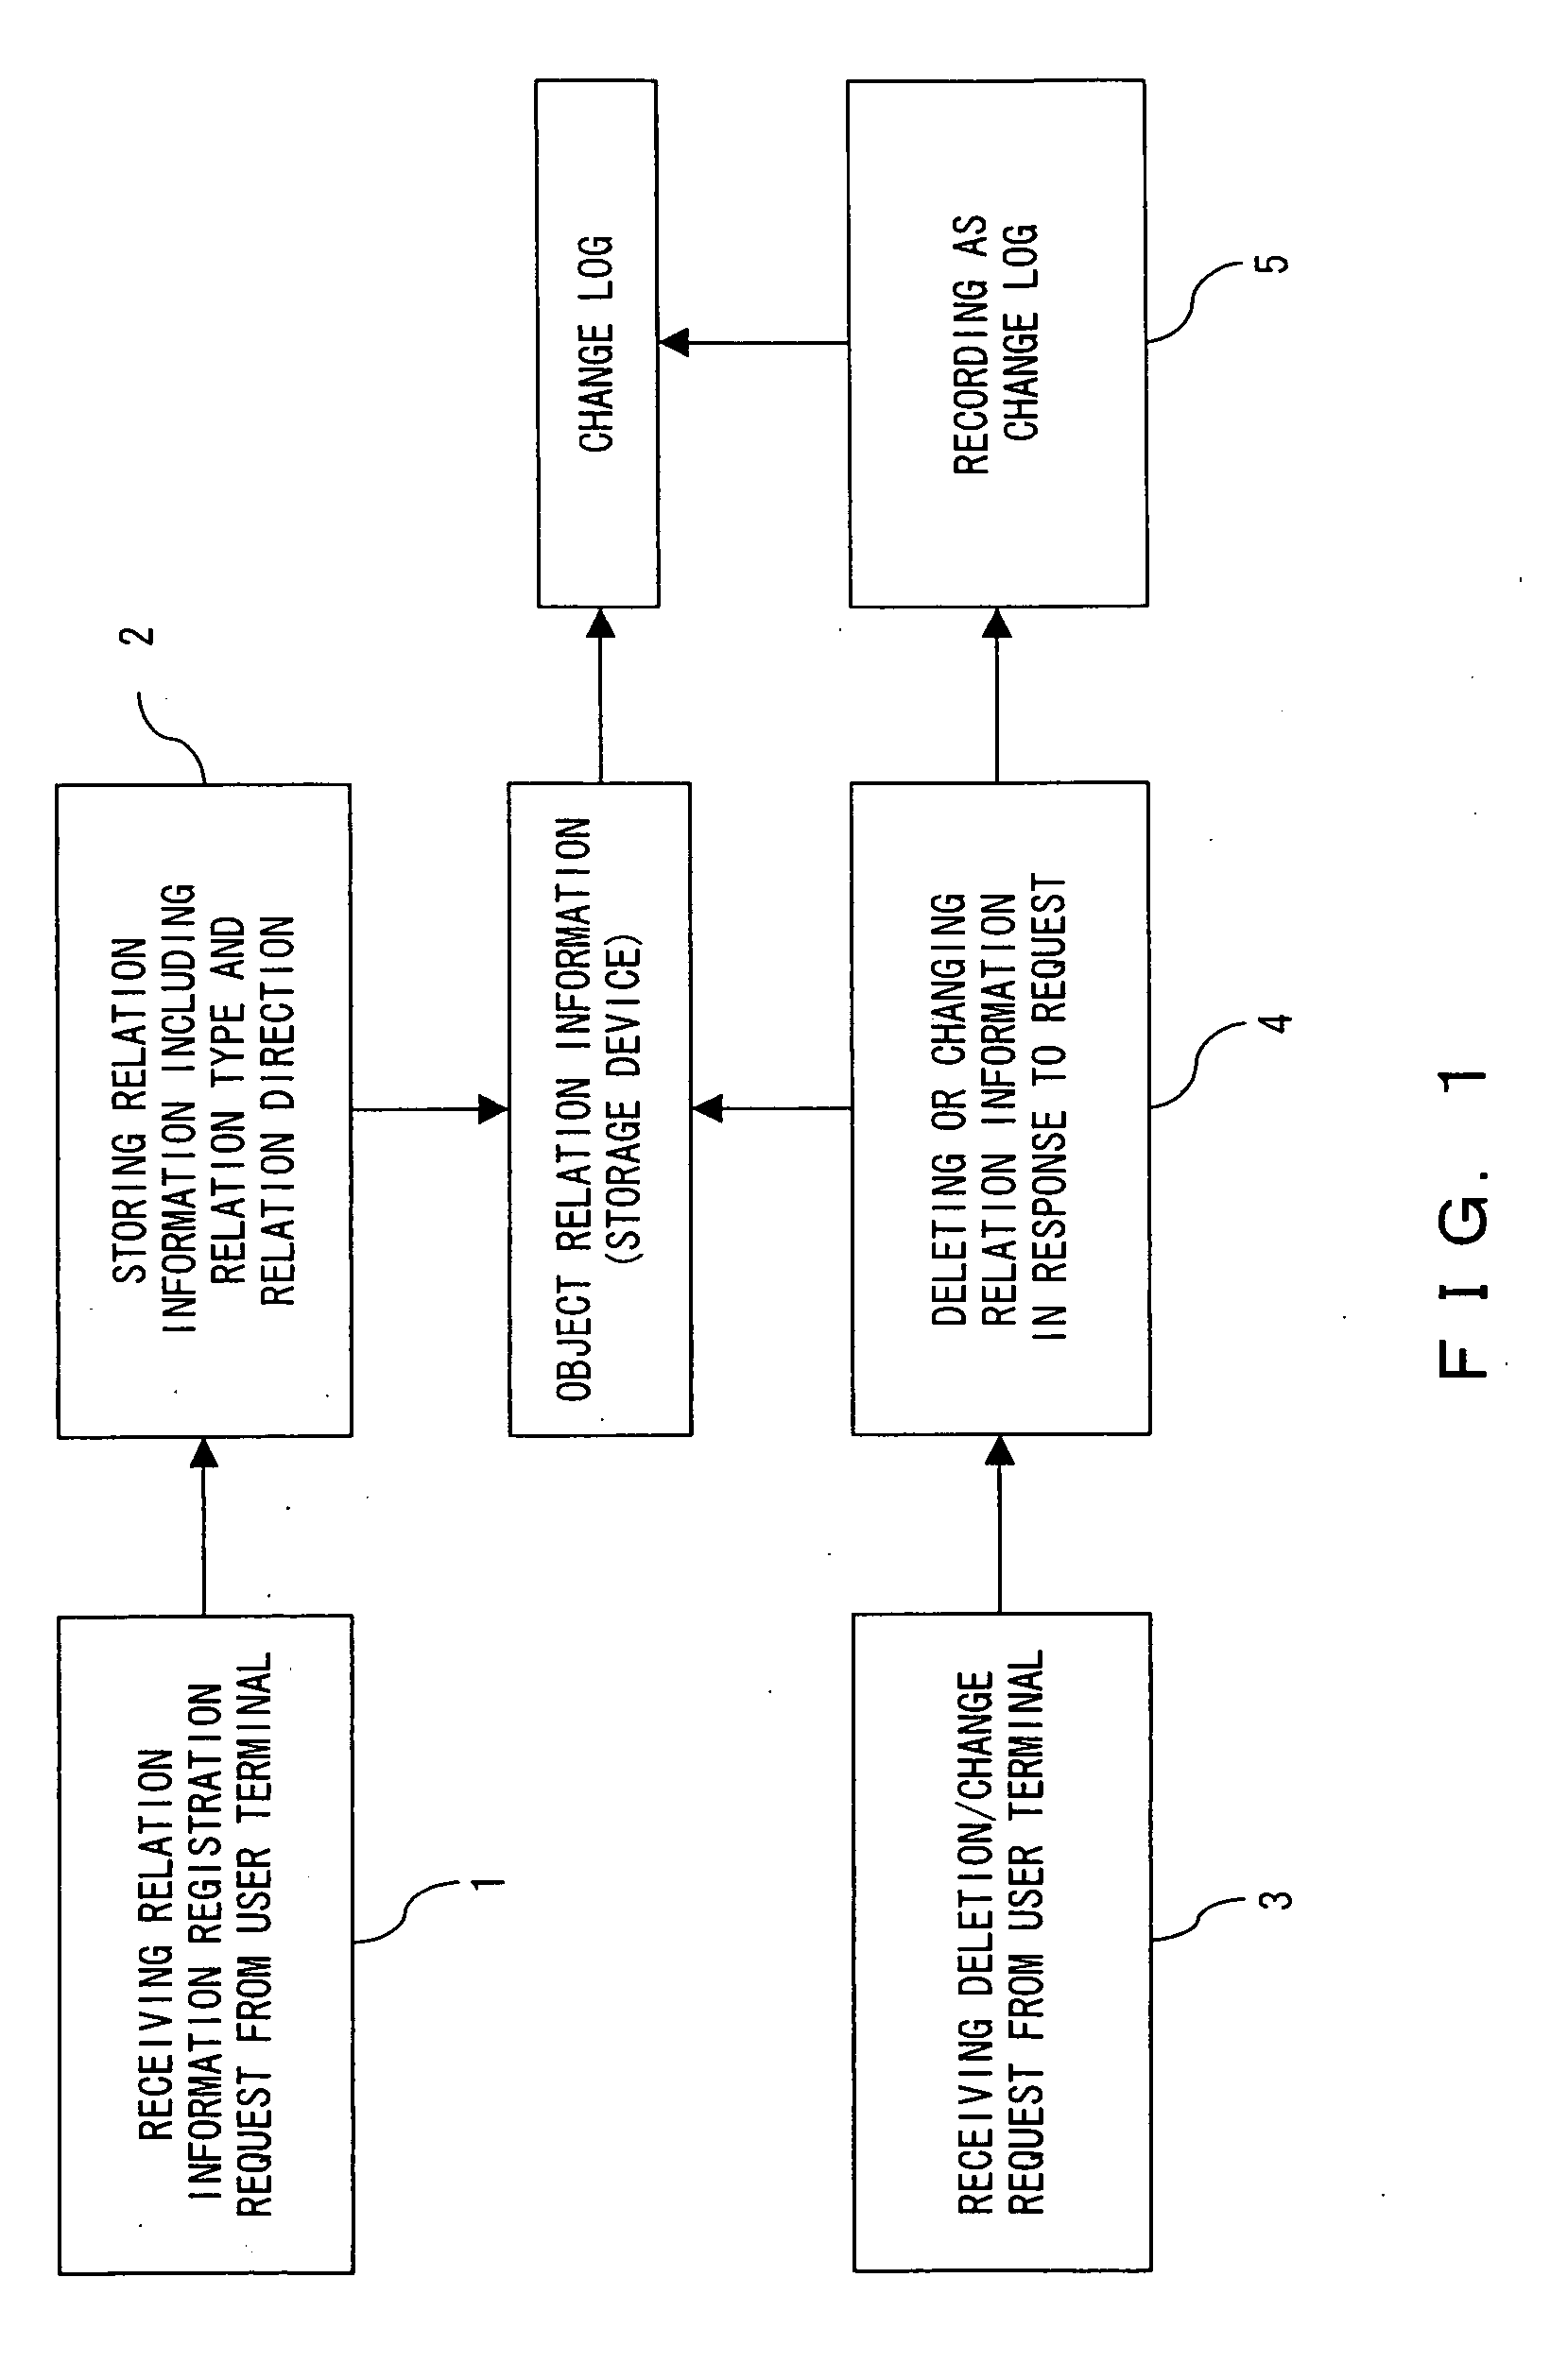 Object relation information management program, method, and apparatus